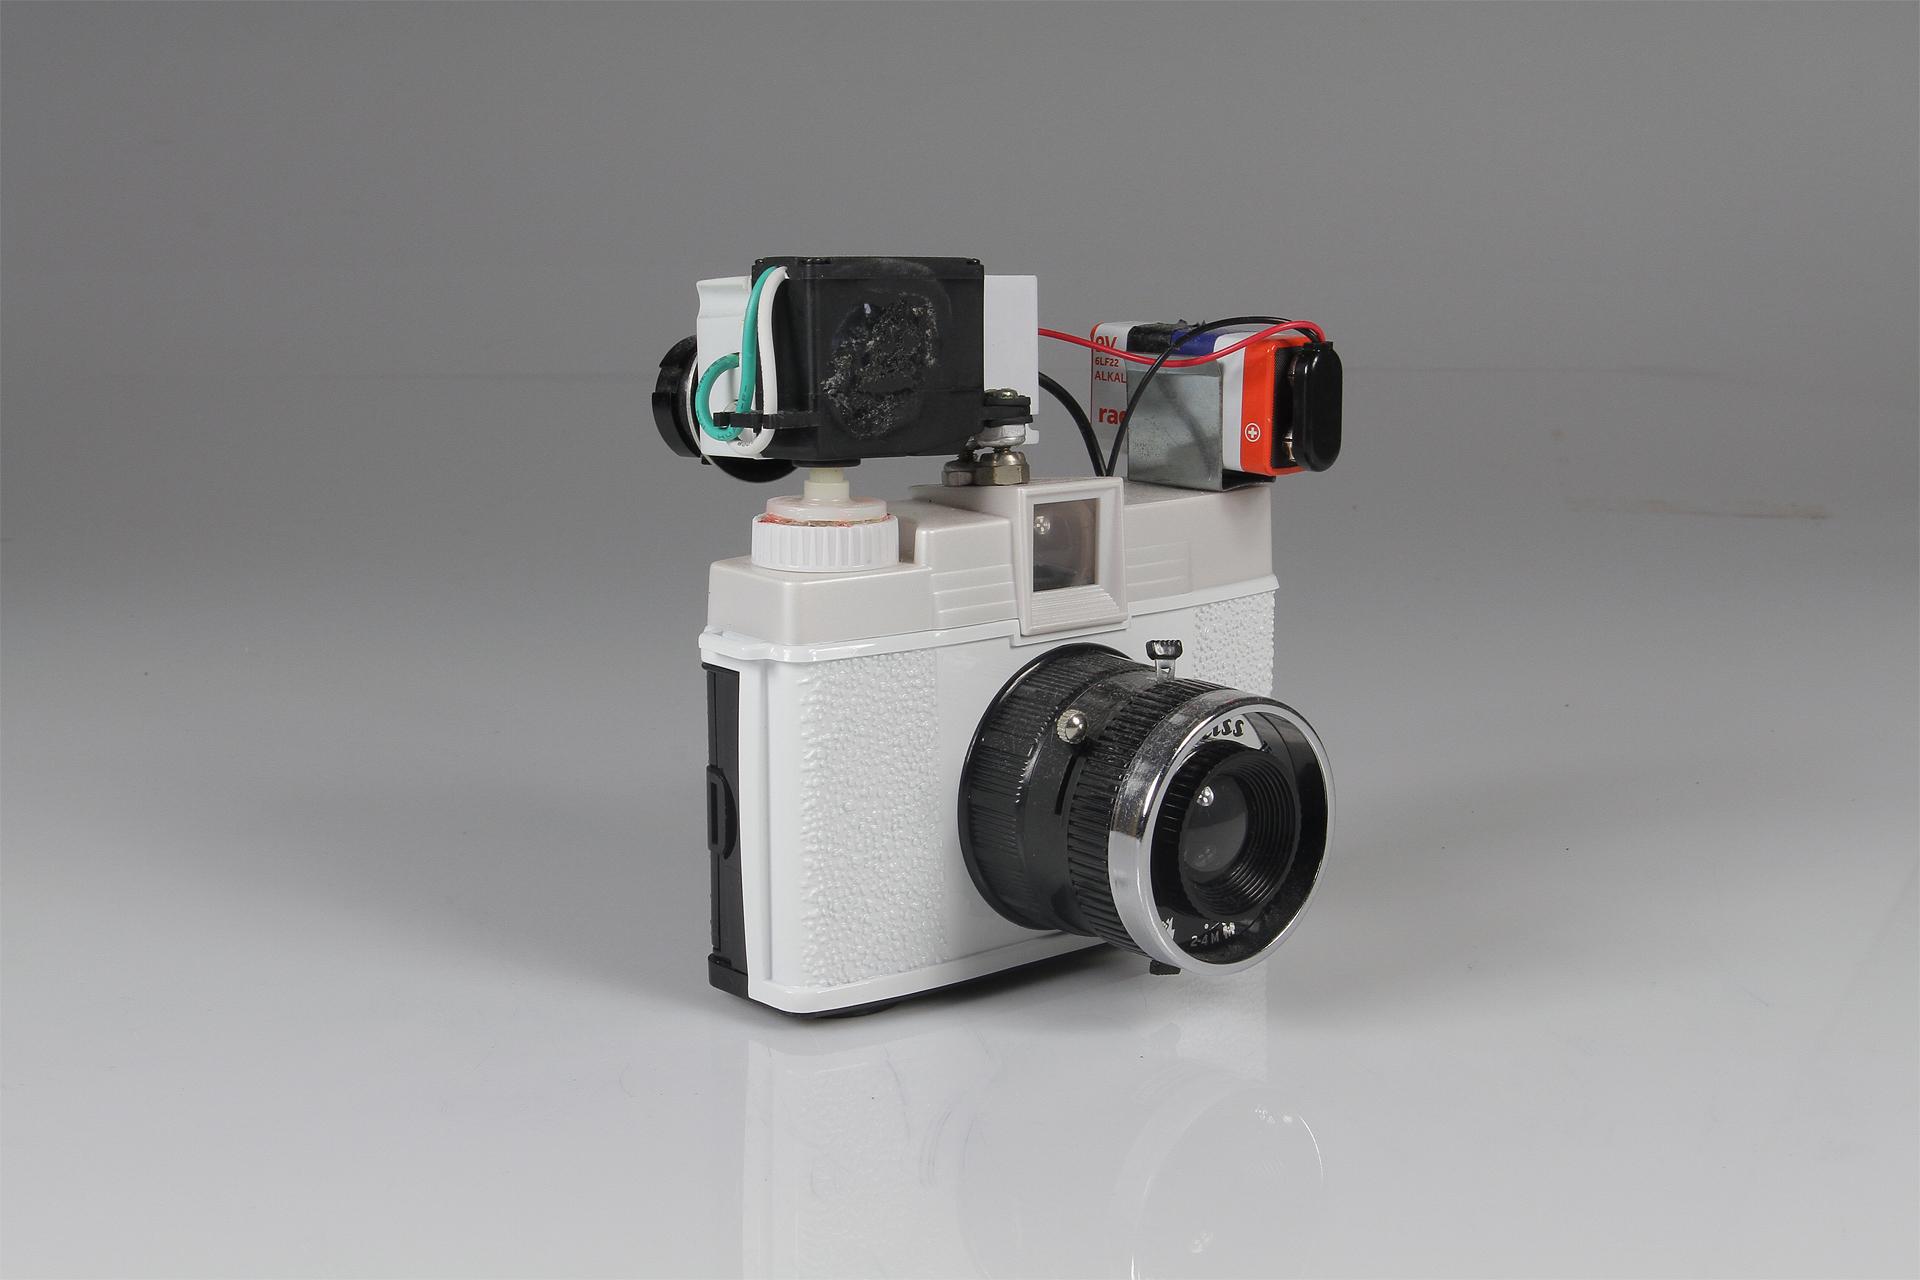   Diana Slitscan Camera  2016.&nbsp; Modified Diana+ with 35mm film back for Strip Photography.&nbsp; Diana+ camera, modified servo motor, pulse-width modulation circuit (for motor speed control), 9v battery, battery clip, electrical wire, salvaged n